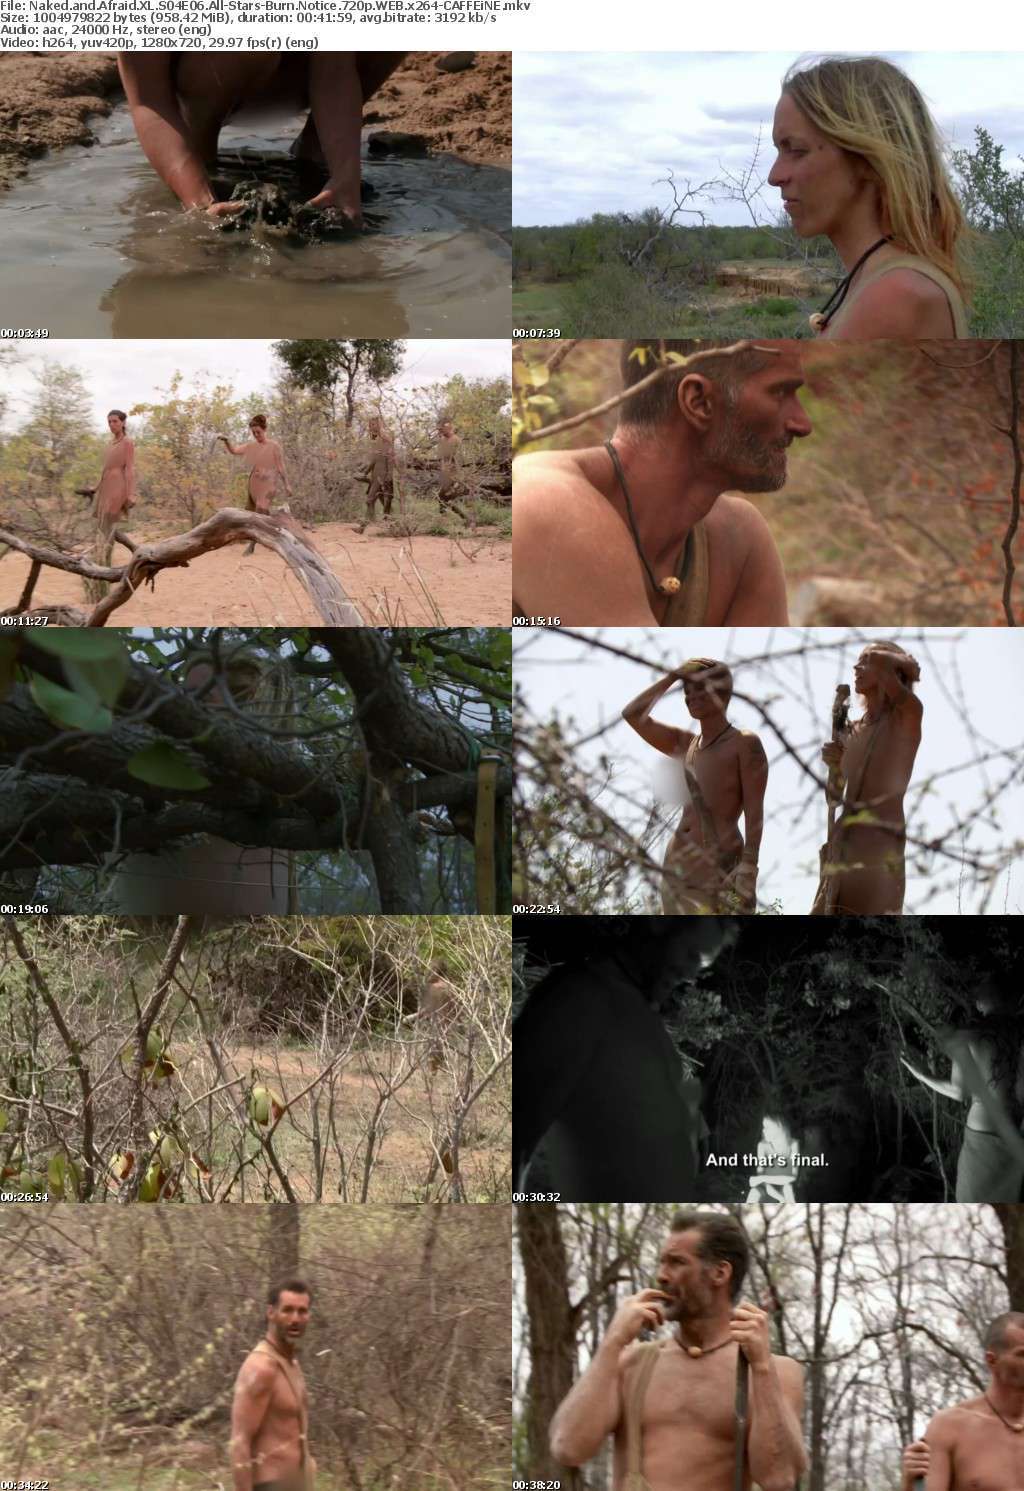 Naked and afraid xl: uncensored all-stars